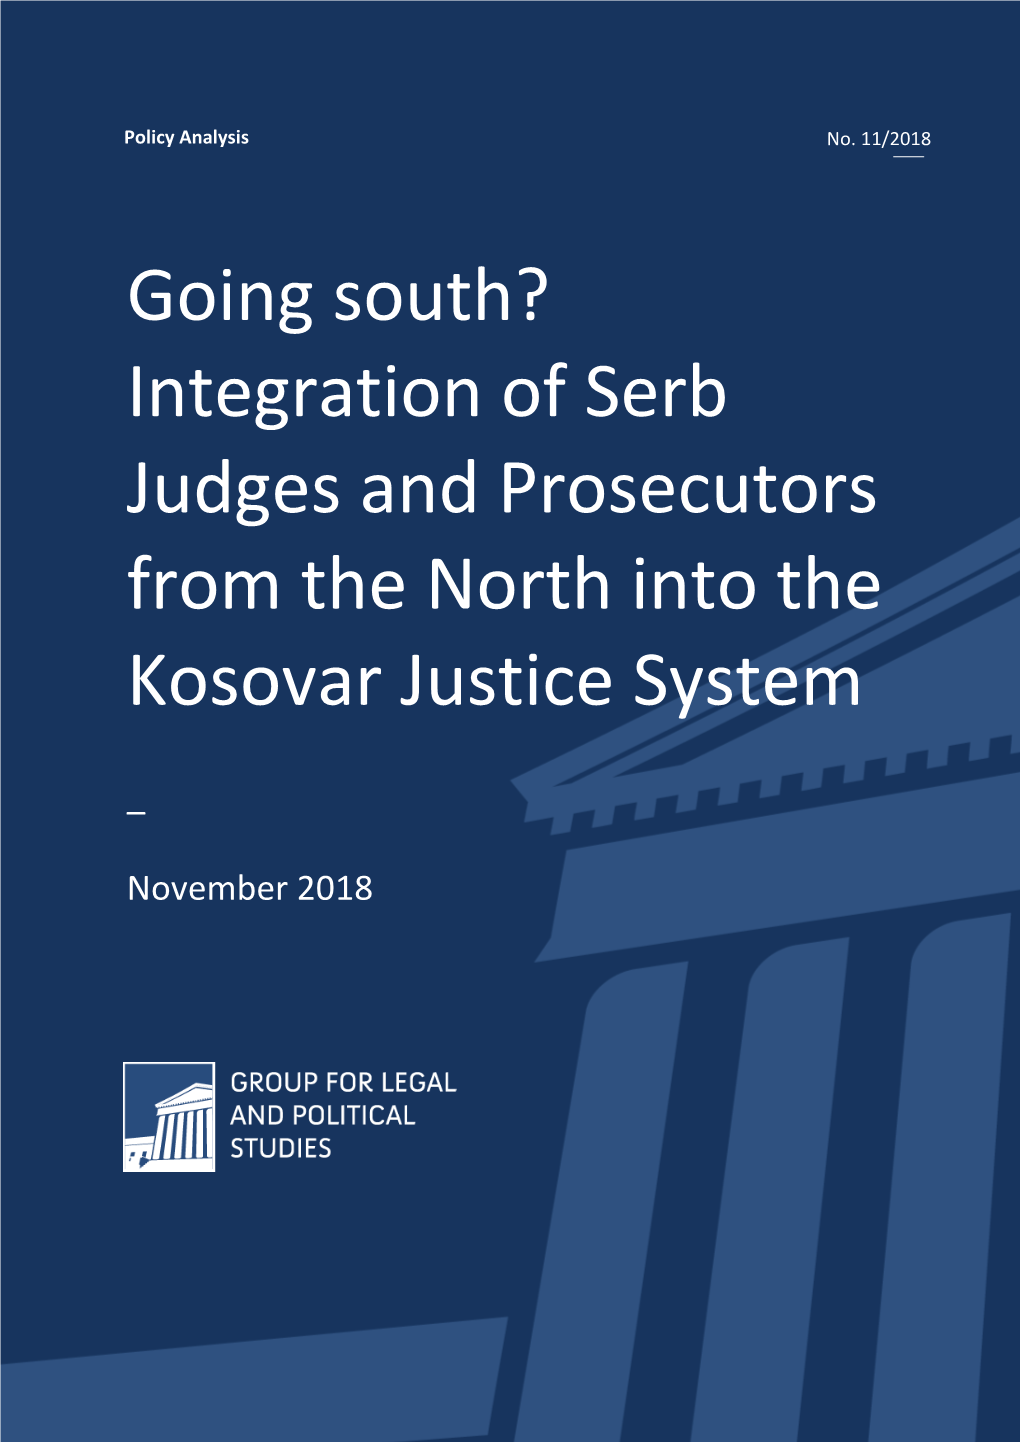 Integration of Serb Judges and Prosecutors from the North Into the Kosovar Justice System